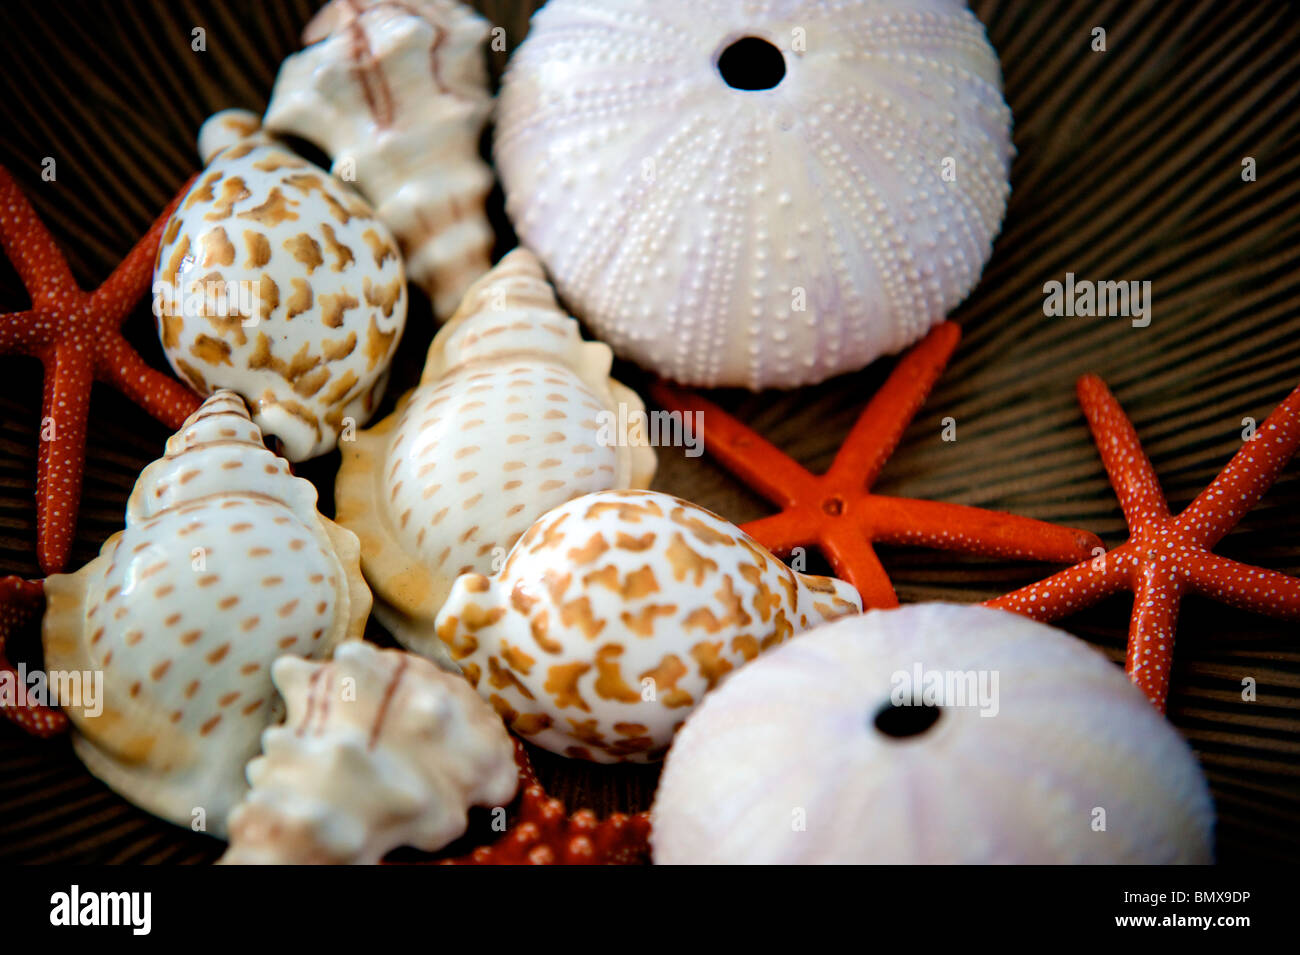 Shells and starfish in a decorative bowl Stock Photo